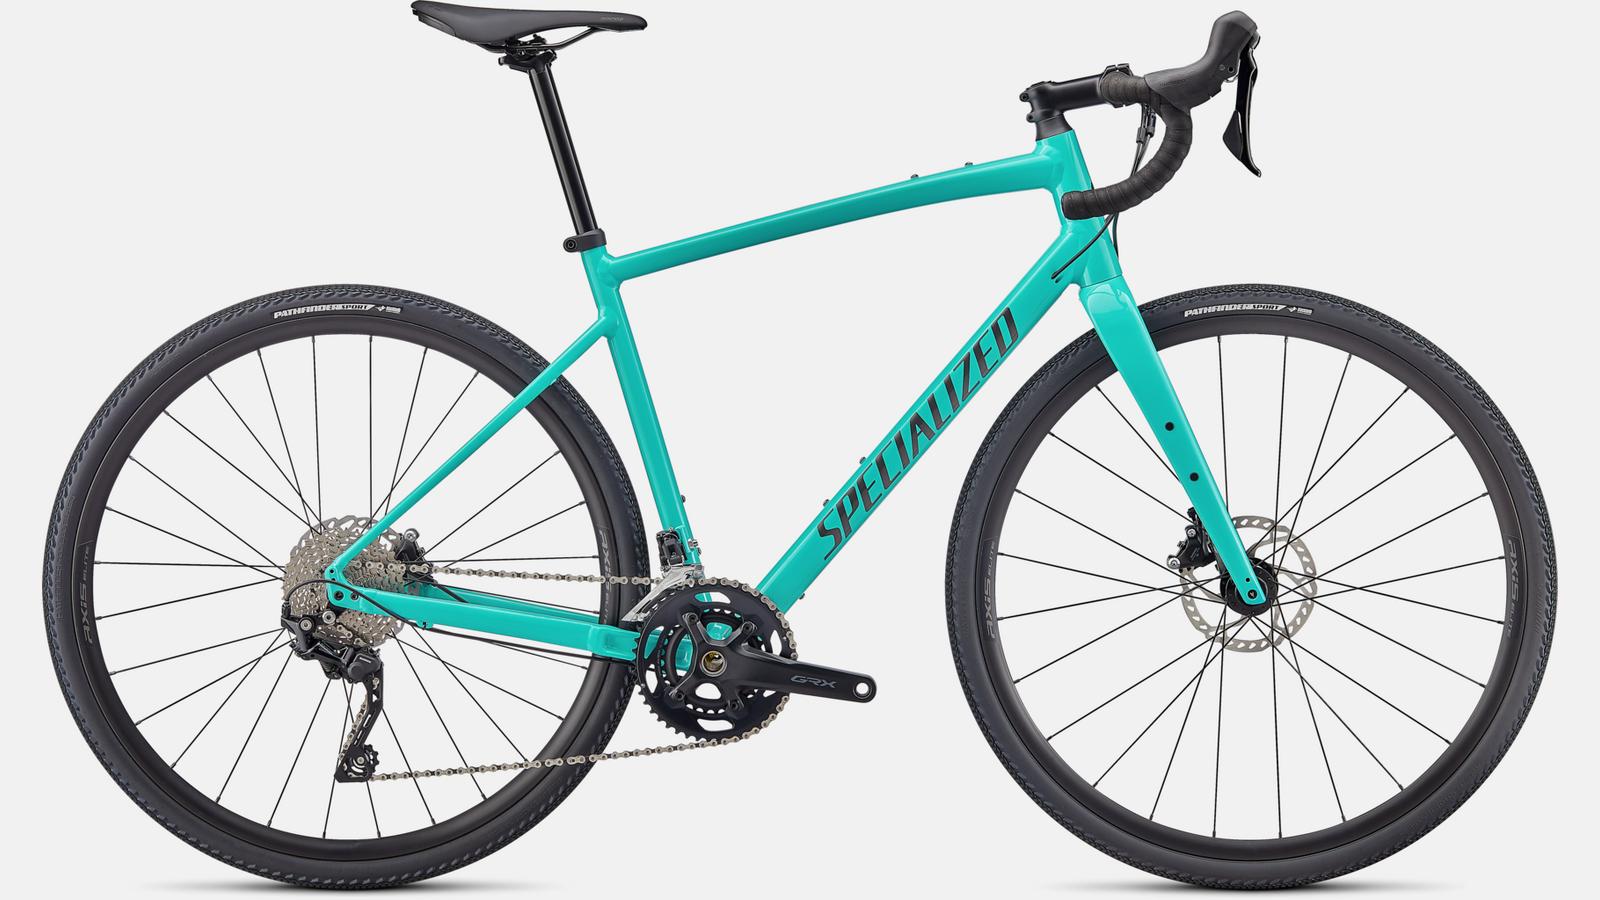 Paint for 2022 Specialized Diverge Elite E5 - Gloss Lagoon Blue